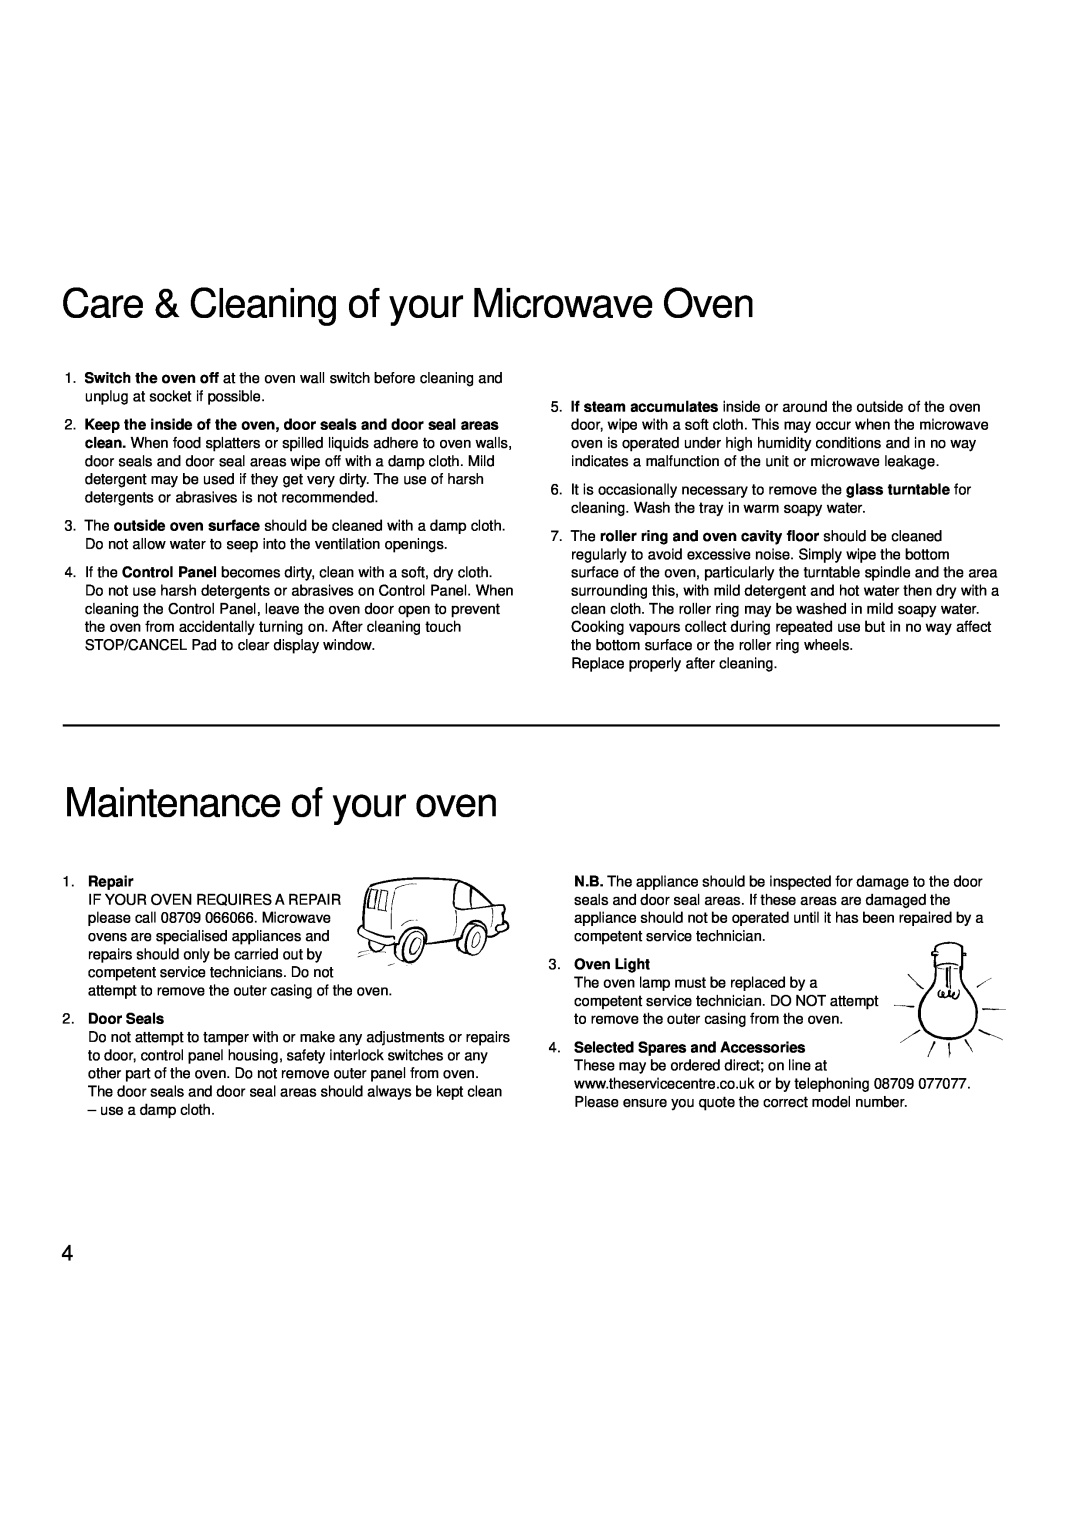 Creda MBO55 manual Care & Cleaning of your Microwave Oven, Maintenance of your oven, Repair, Door Seals, Oven Light 